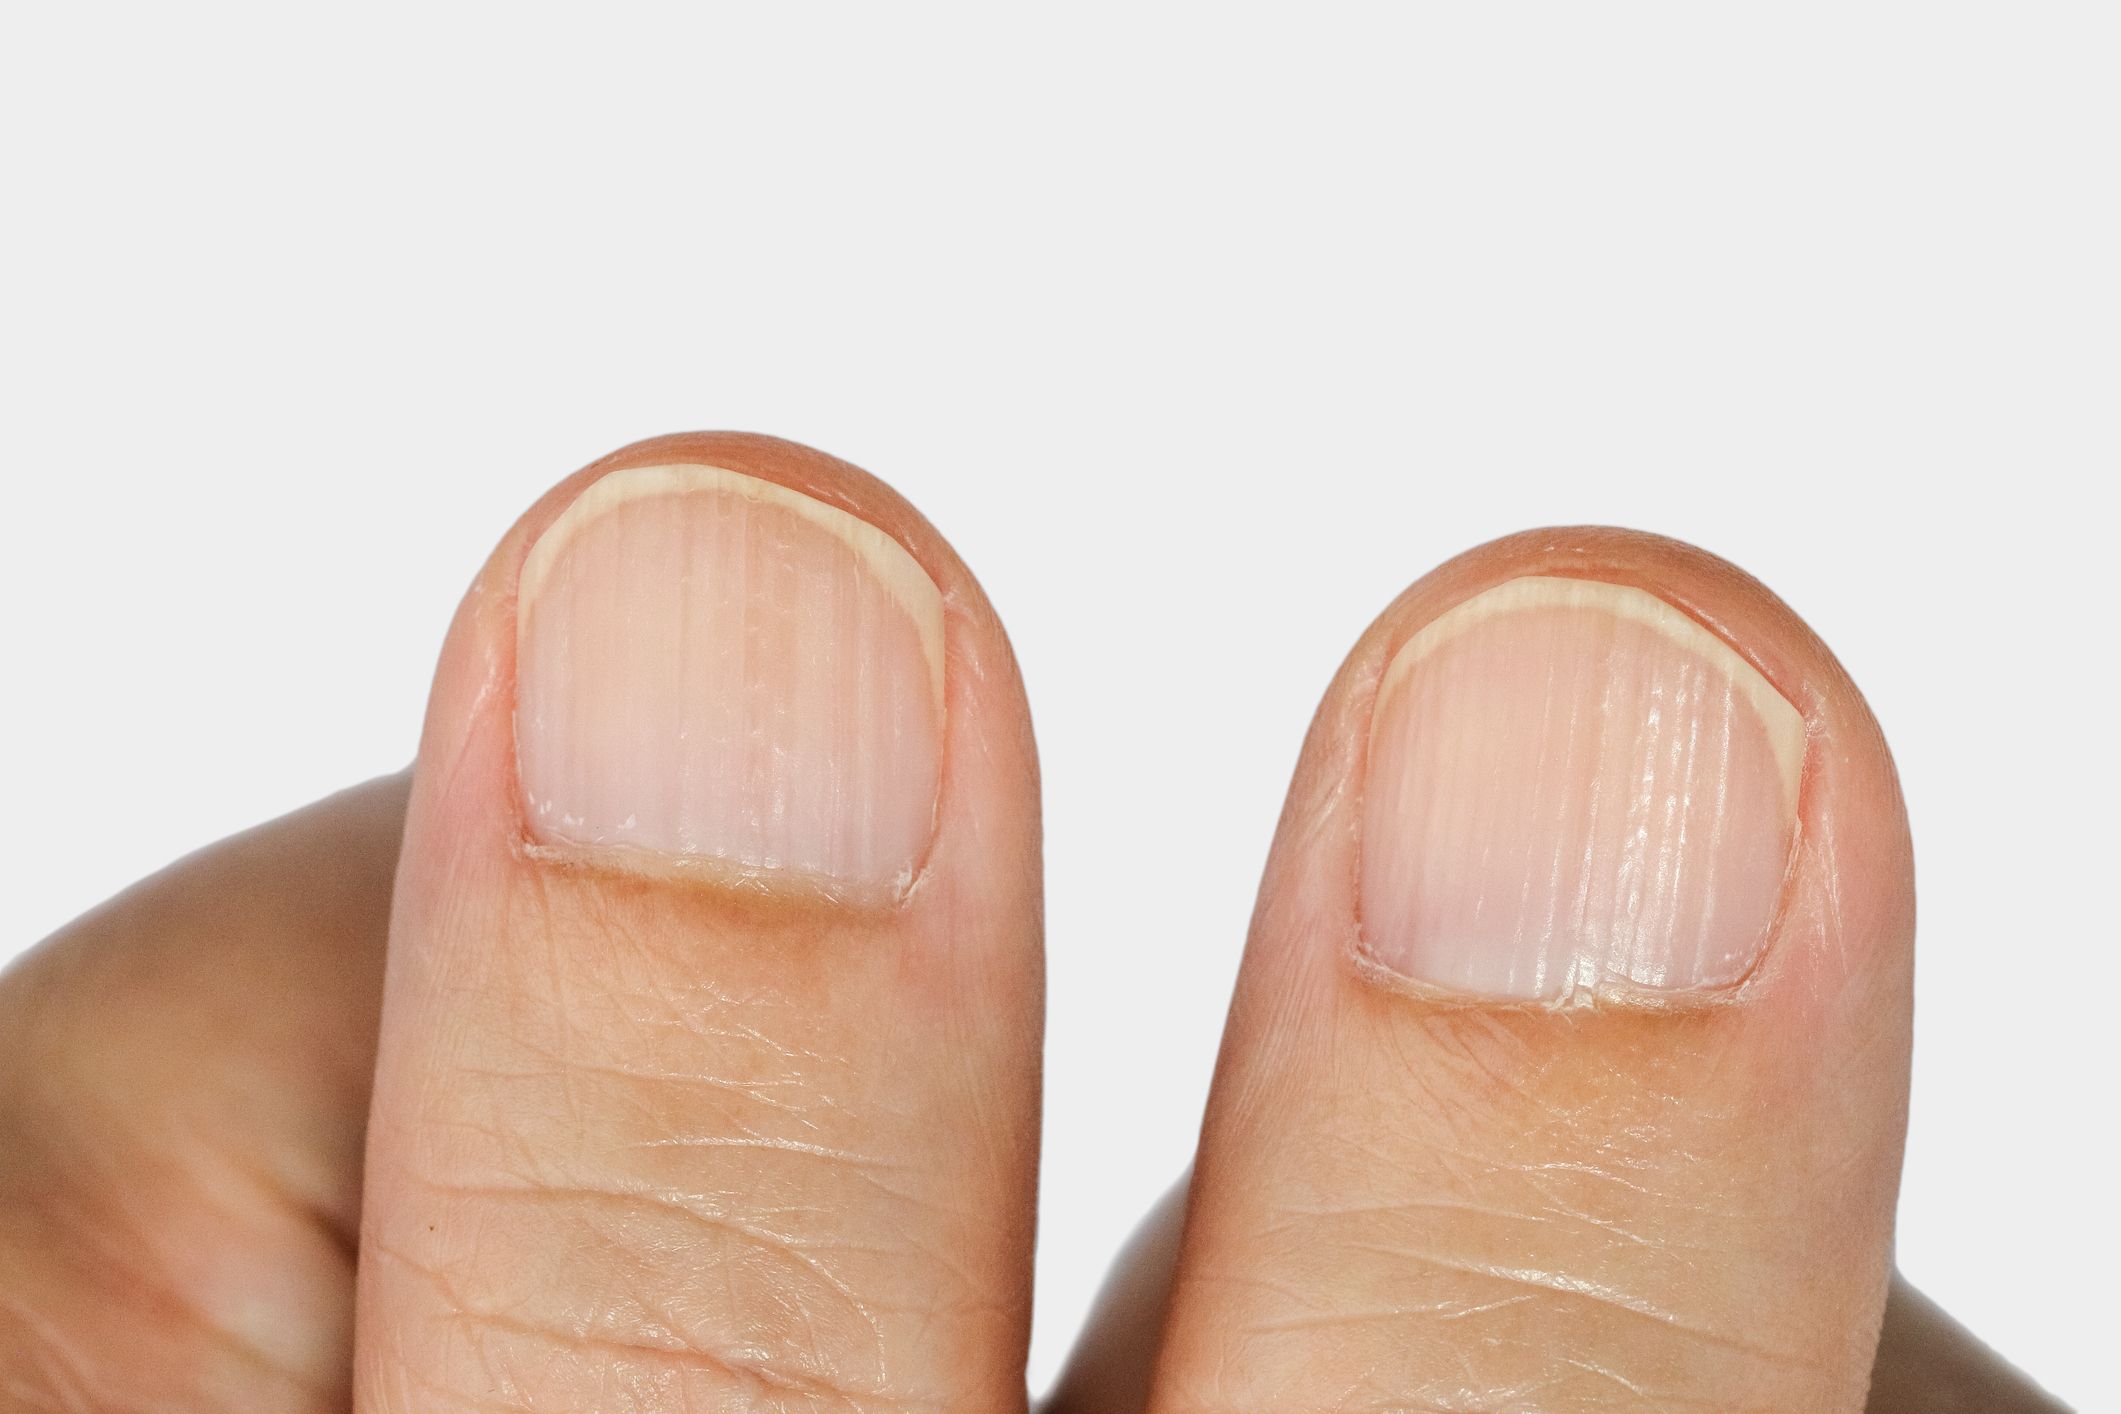 Psoriatic Arthritis Nail Changes Symptoms and Treatments